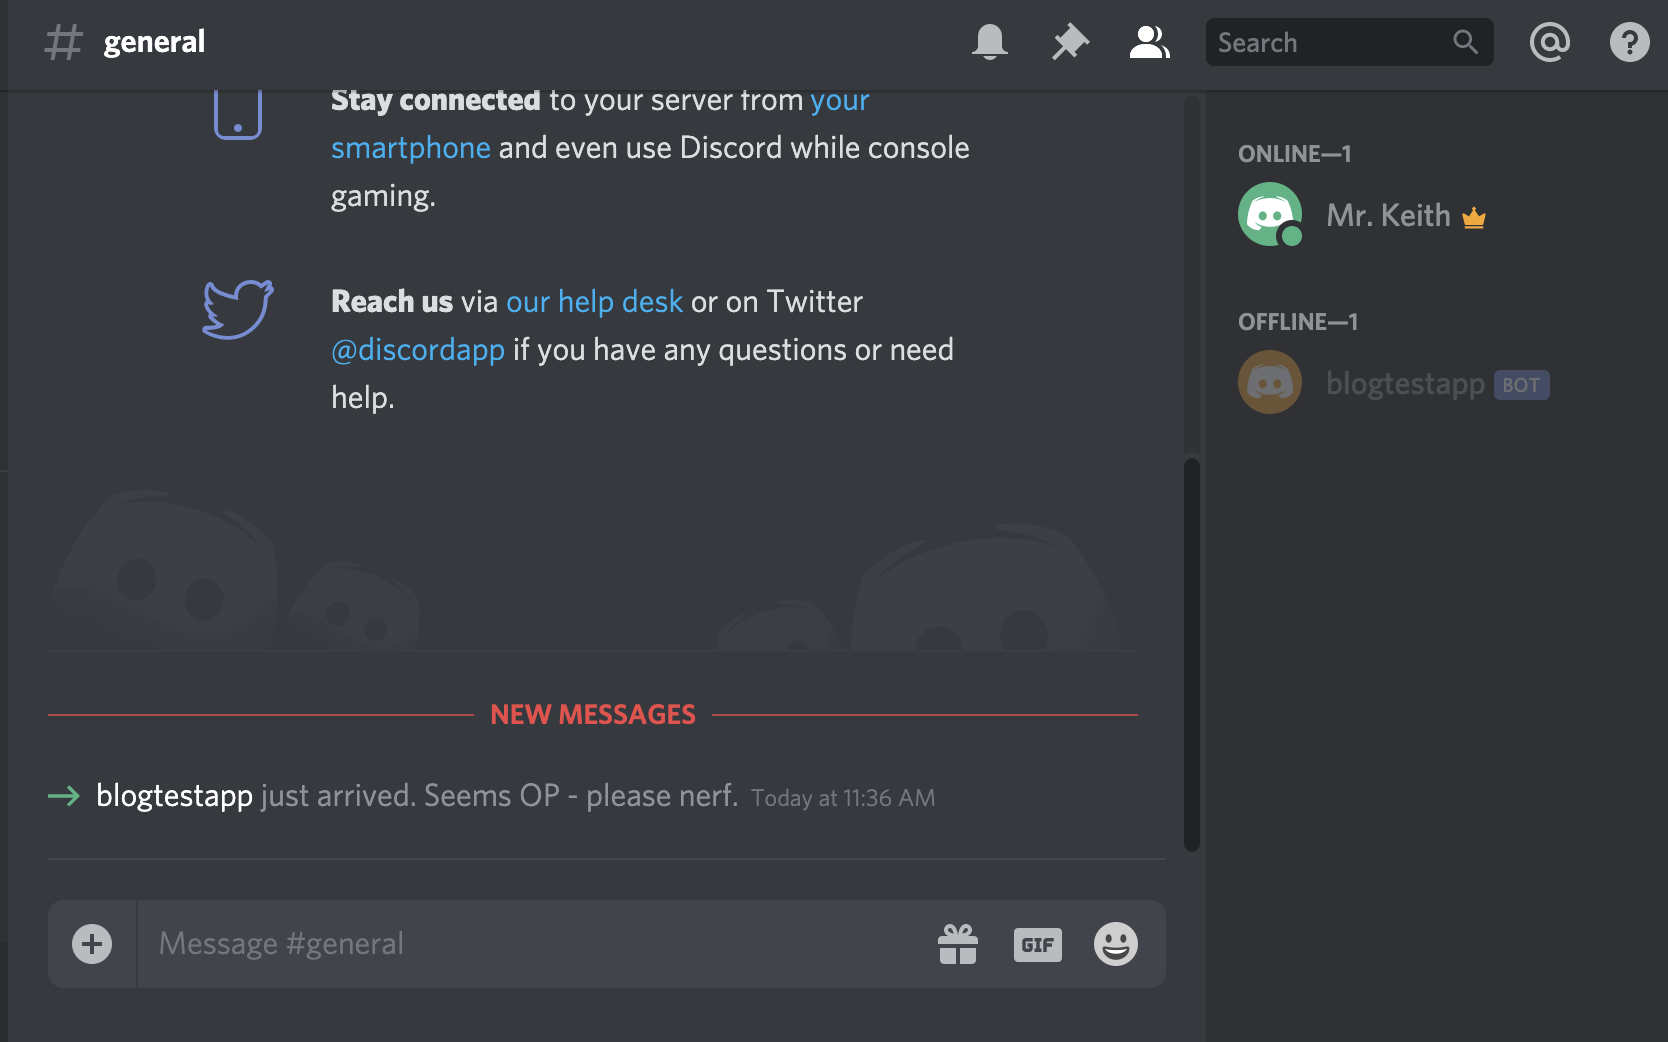 Now if you navigate back to Discord, you should see the bot listed in your Discord...